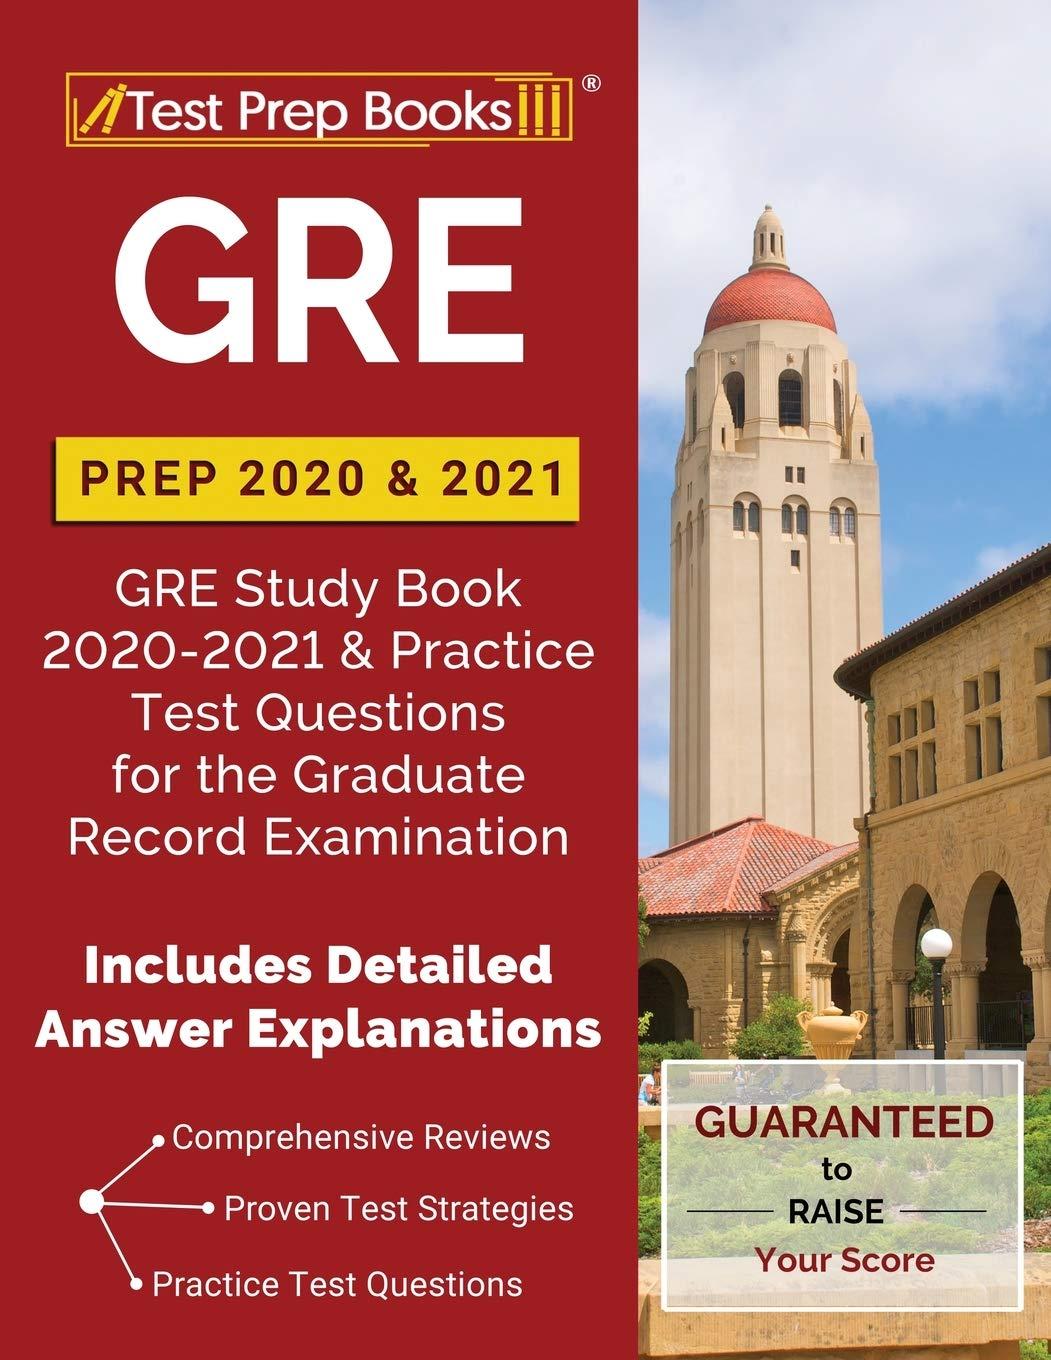 gre prep 2020 and 2021 gre study book 2020-2021 and practice test questions for the graduate record